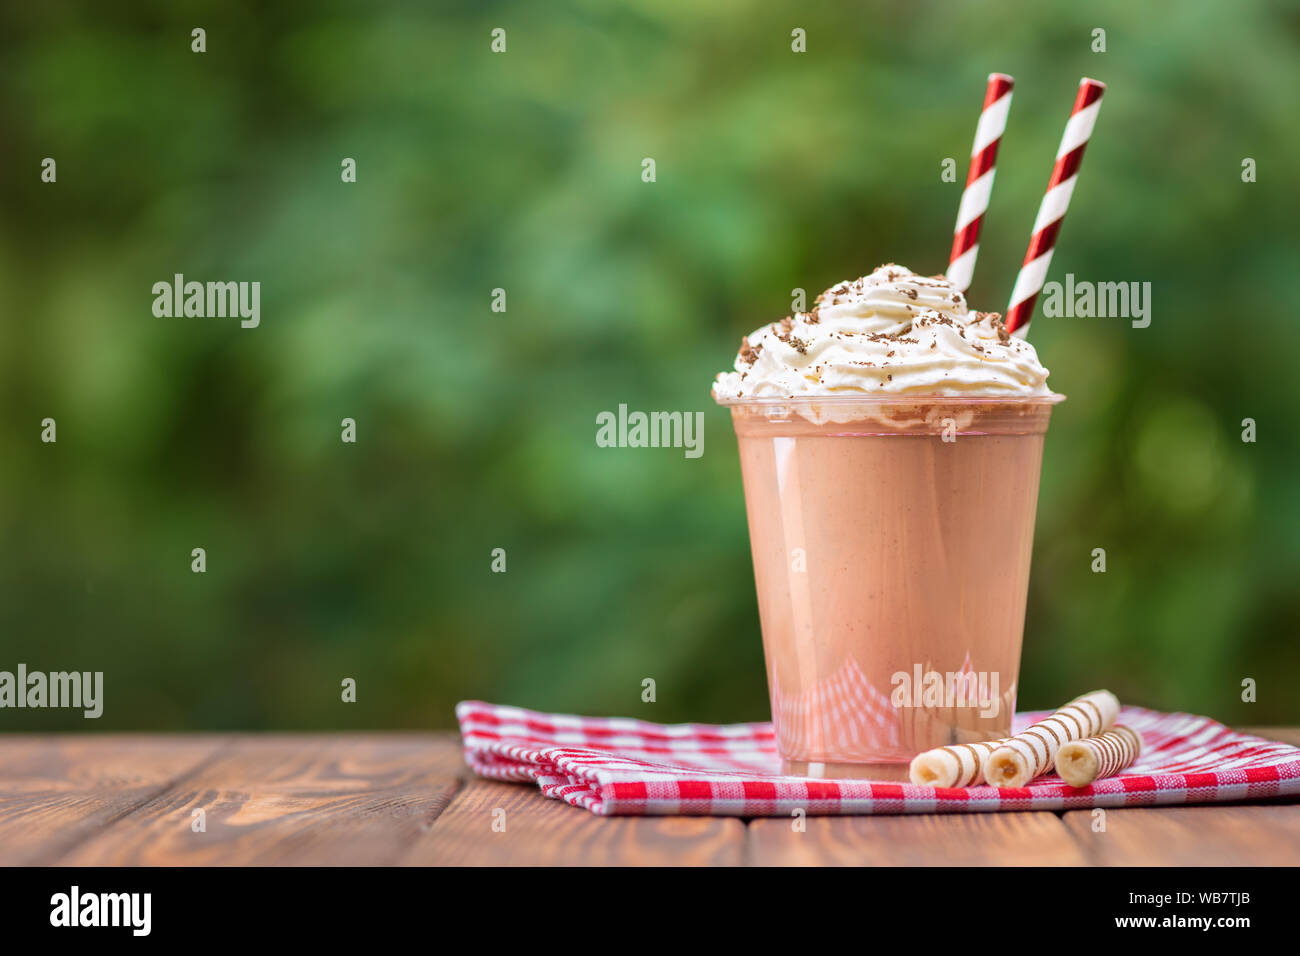 chocolate milkshake in disposable plastic cup with whipped cream and wafer rolls on wooden table outdoors Stock Photo